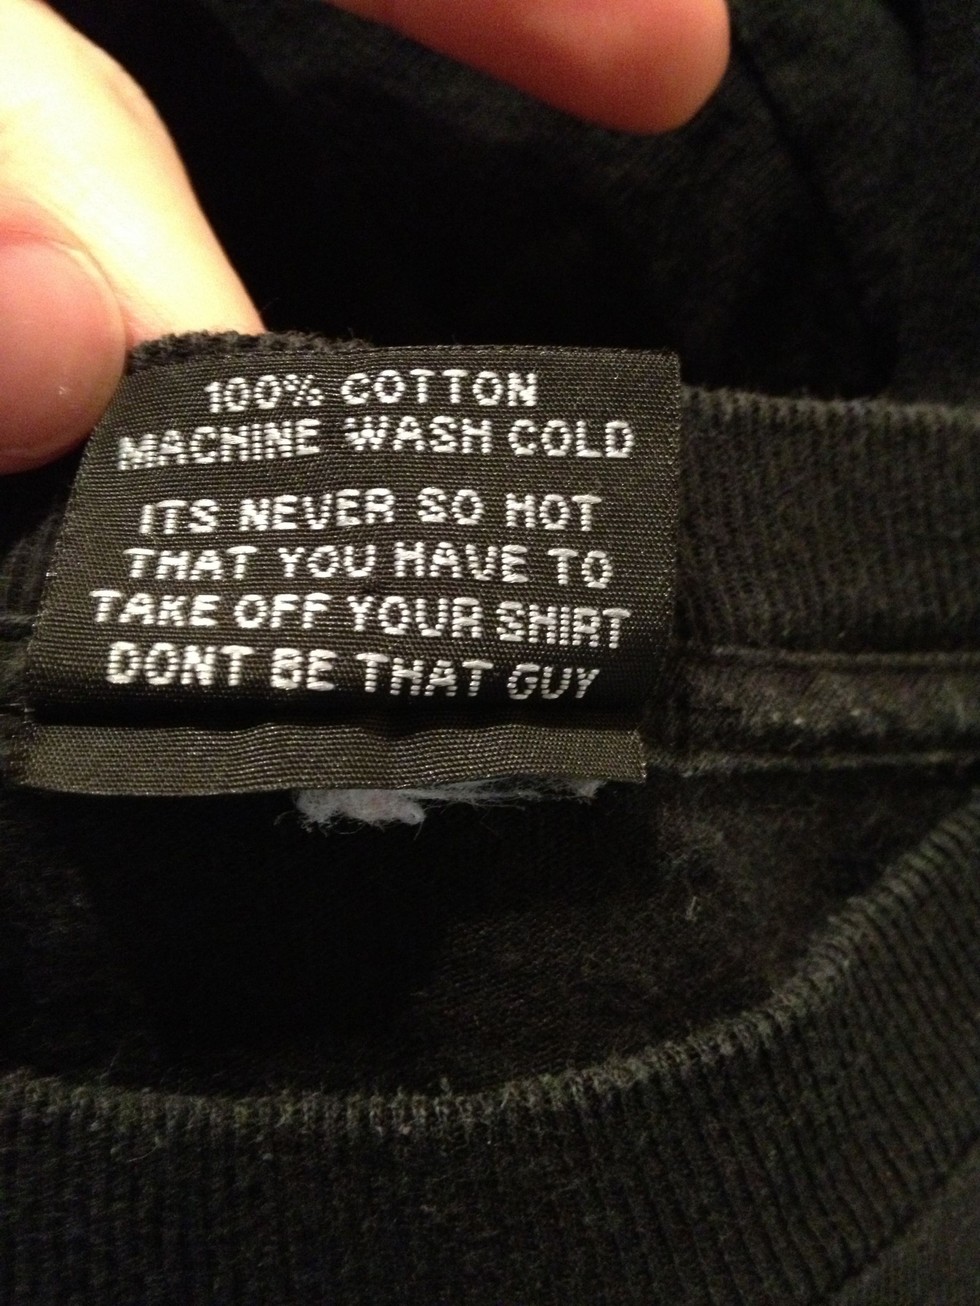 20 ridiculous instructions that actually exist